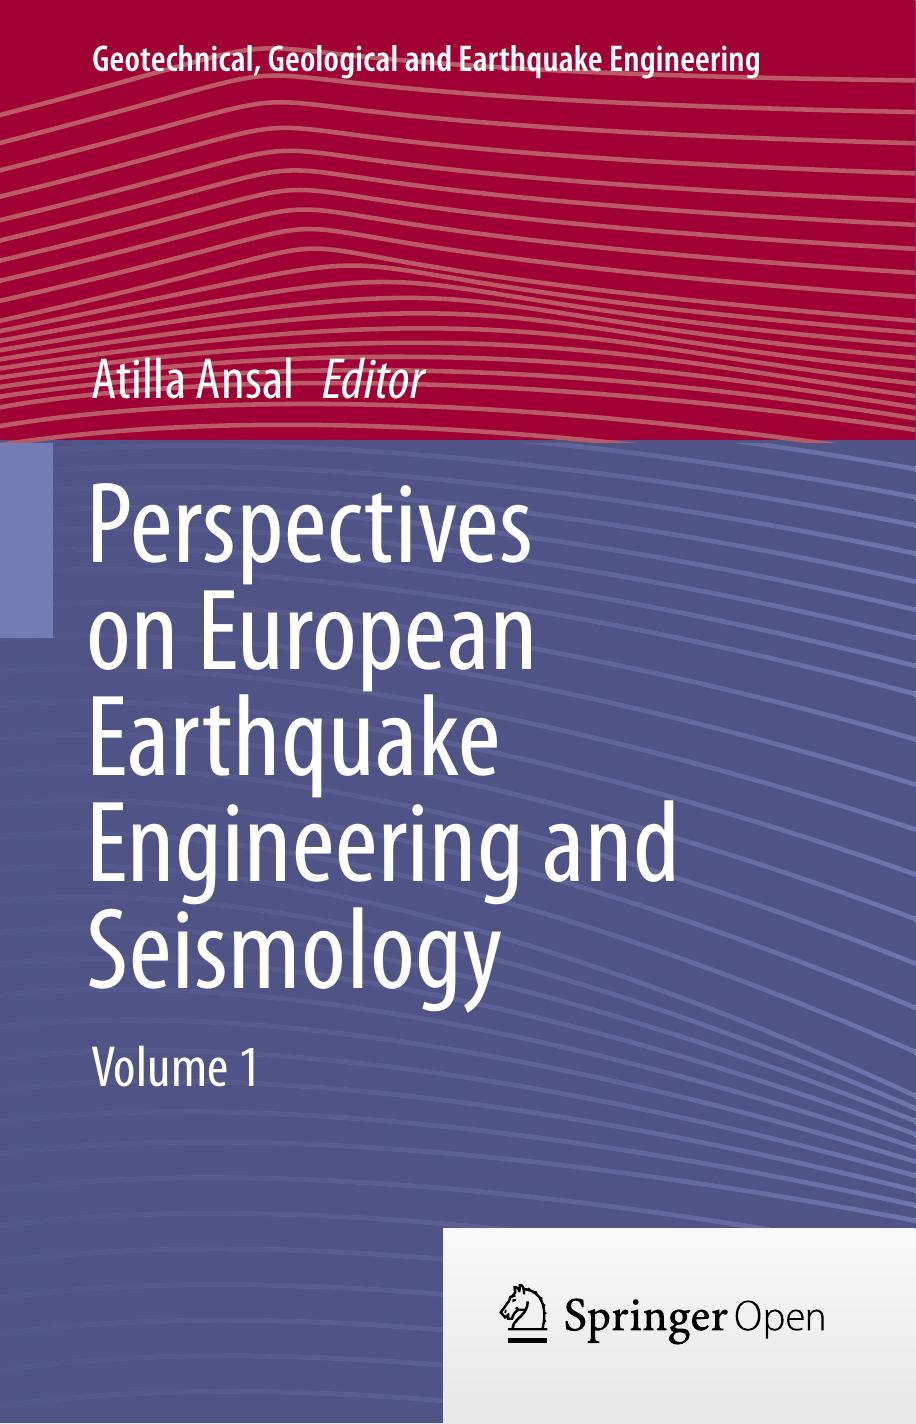 Perspectives on European Earthquake Engineering and Seismology by Atilla Ansal